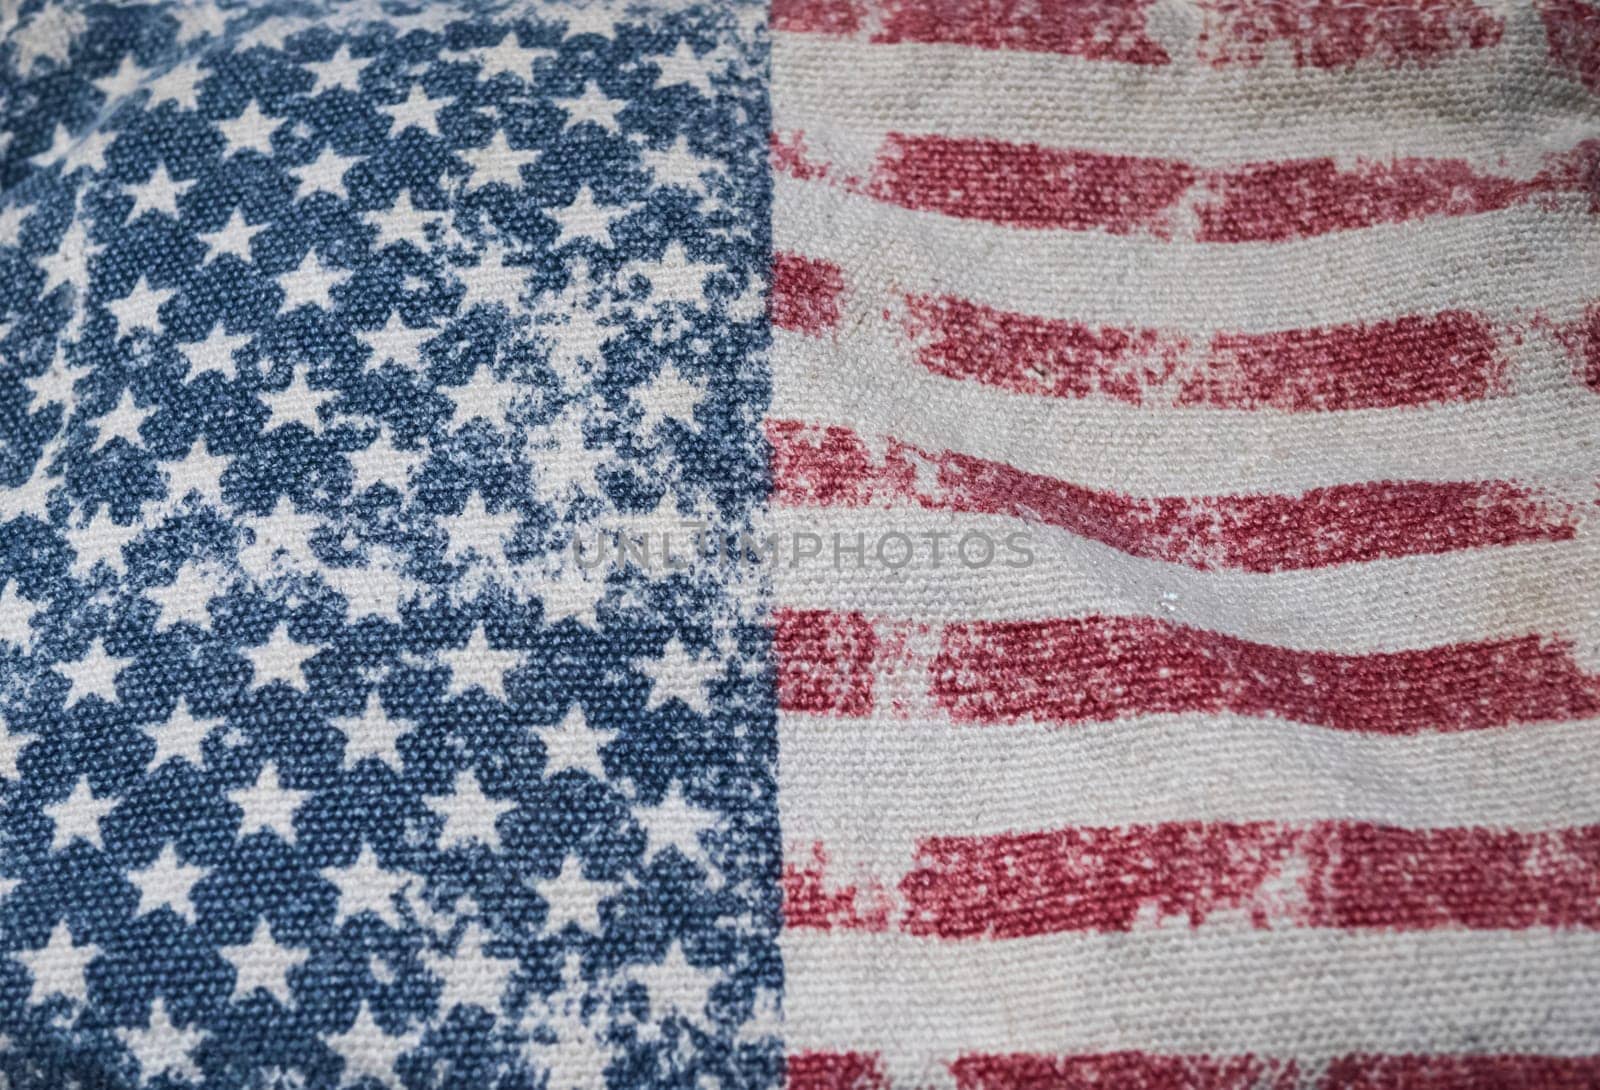 USA flag in grunge style. Old texture. Old grunge vintage faded American flag